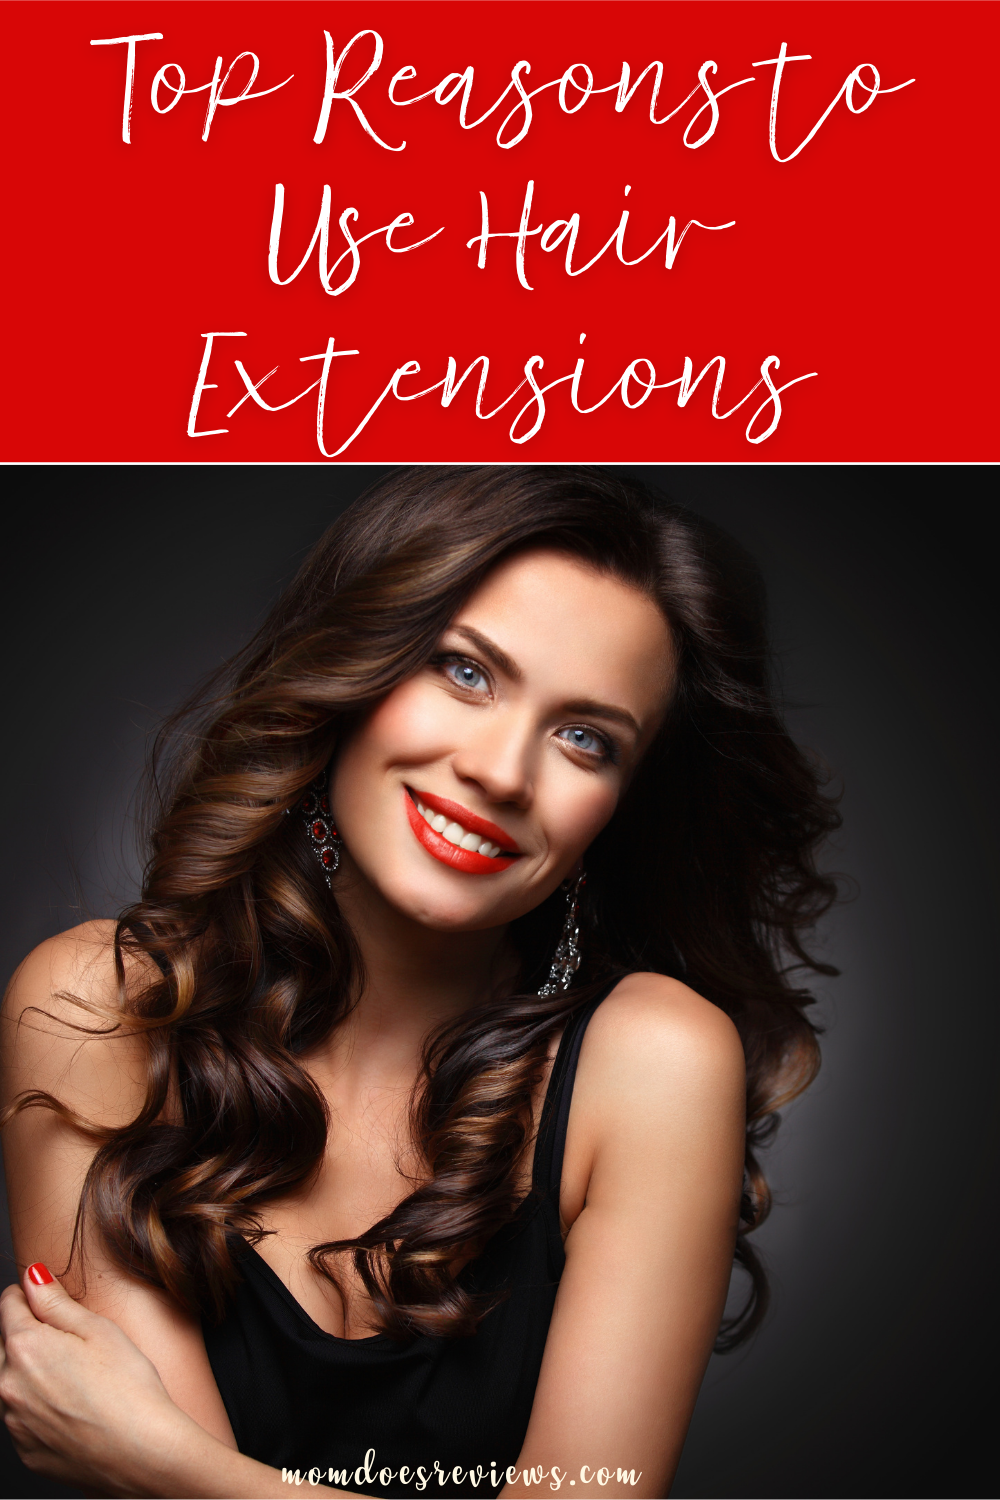 Top Reasons to Use Hair Extensions